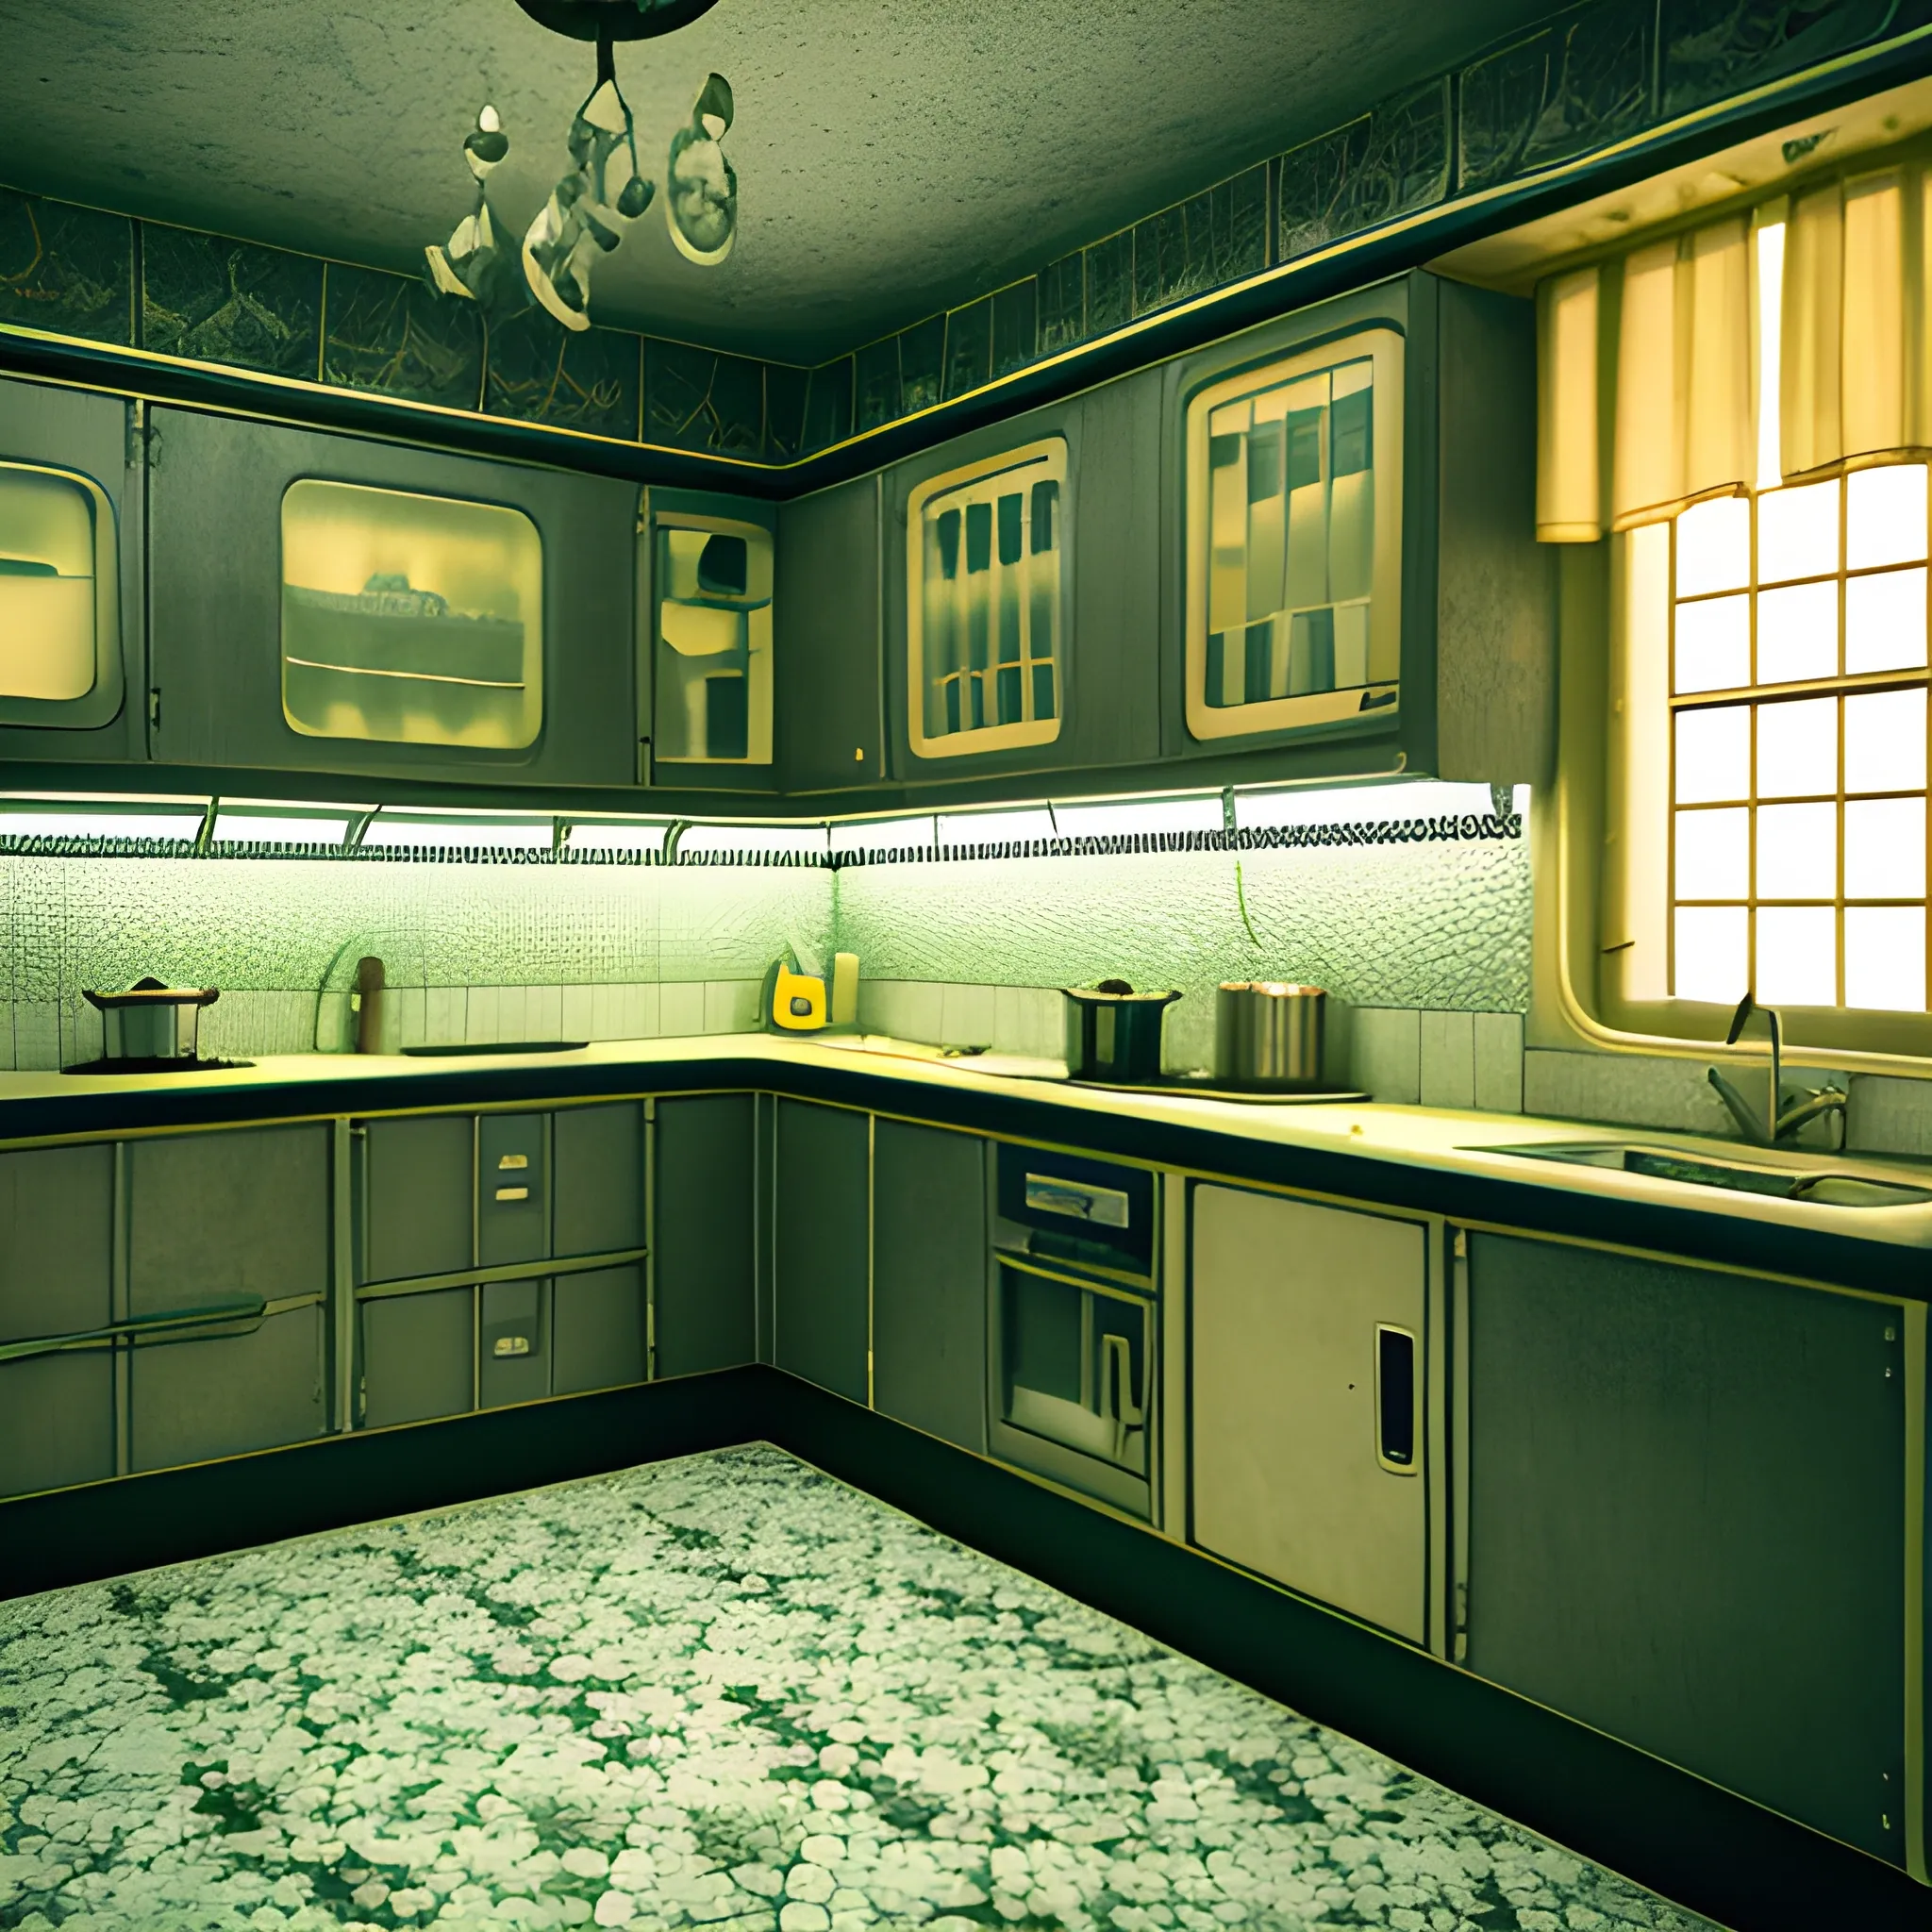 Kitchen, fancy dinner, retro futuristic, highly detailed, realistic, sovietism, 4k 